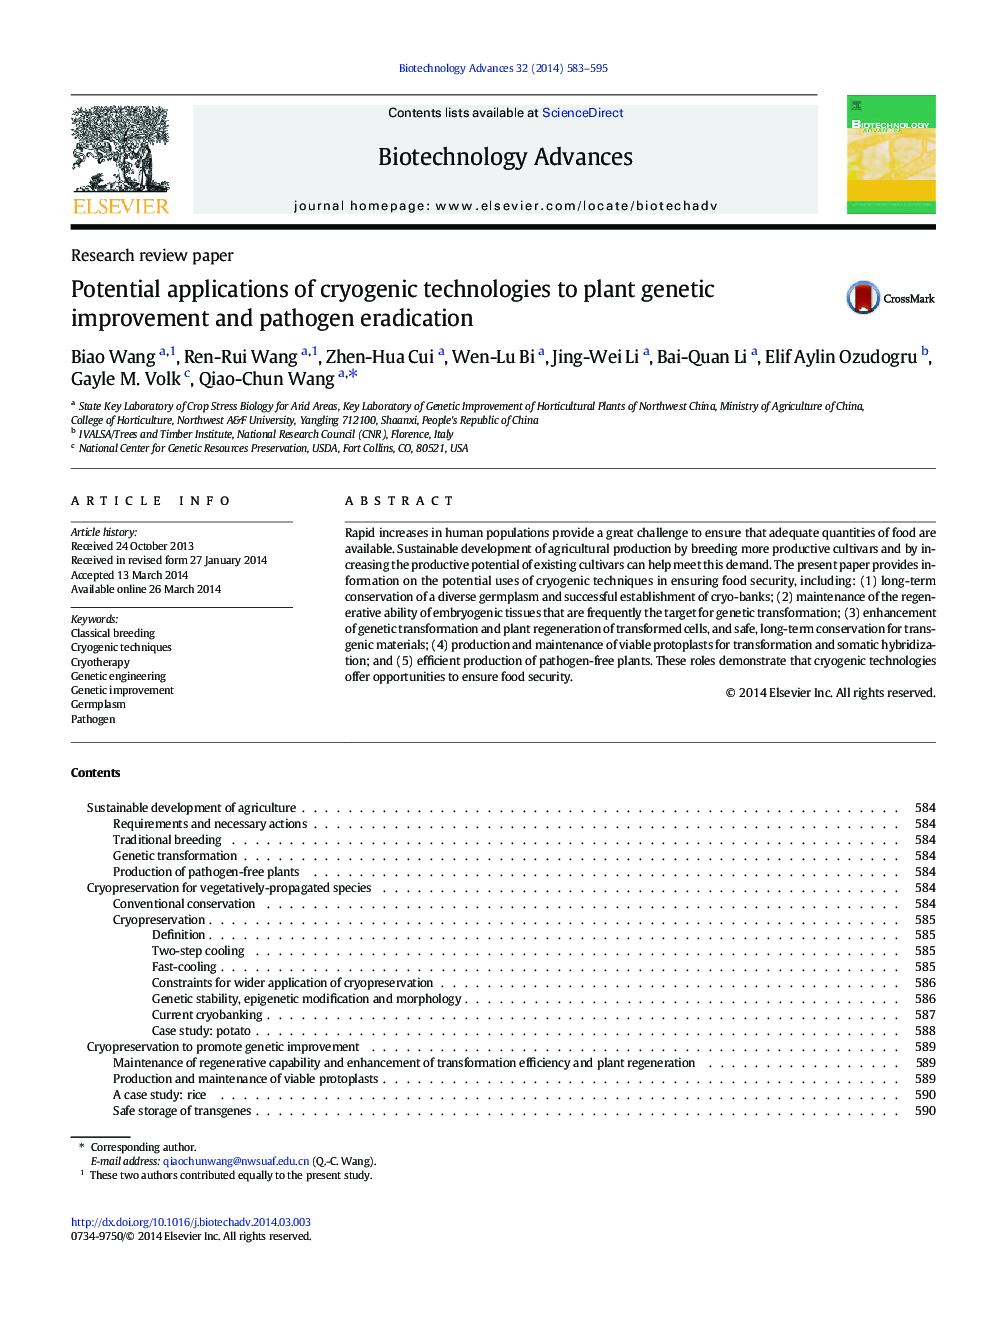 Potential applications of cryogenic technologies to plant genetic improvement and pathogen eradication